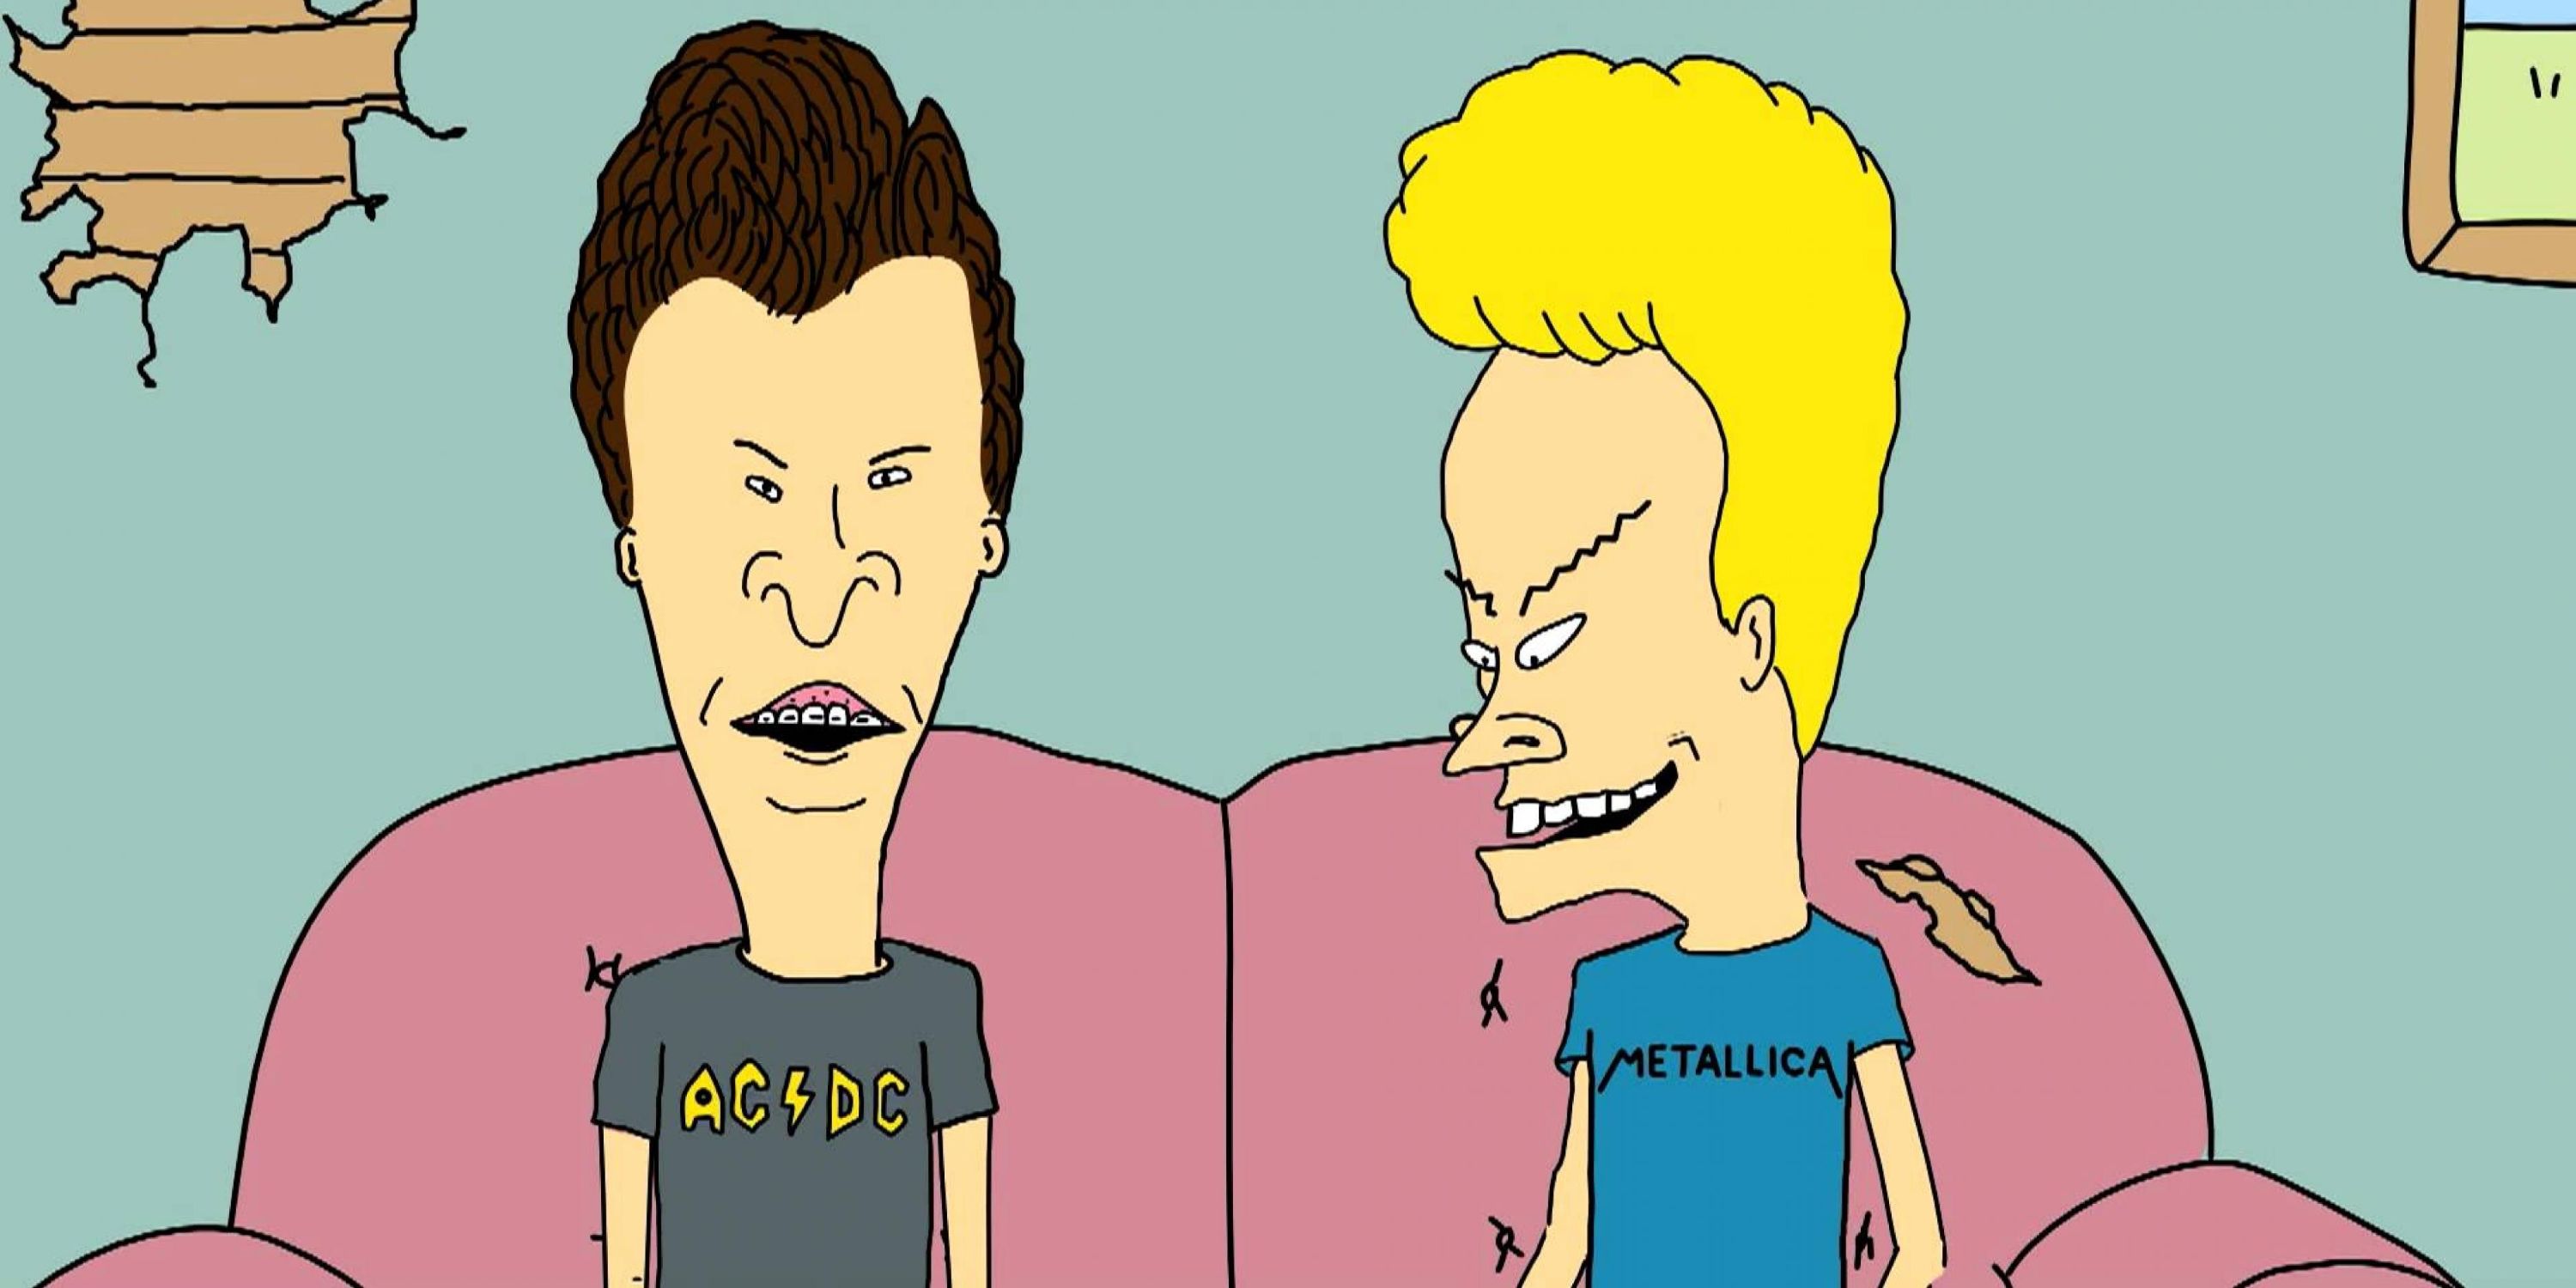 Beavis and Butt-Head sitting on their couch in the MTV animated series